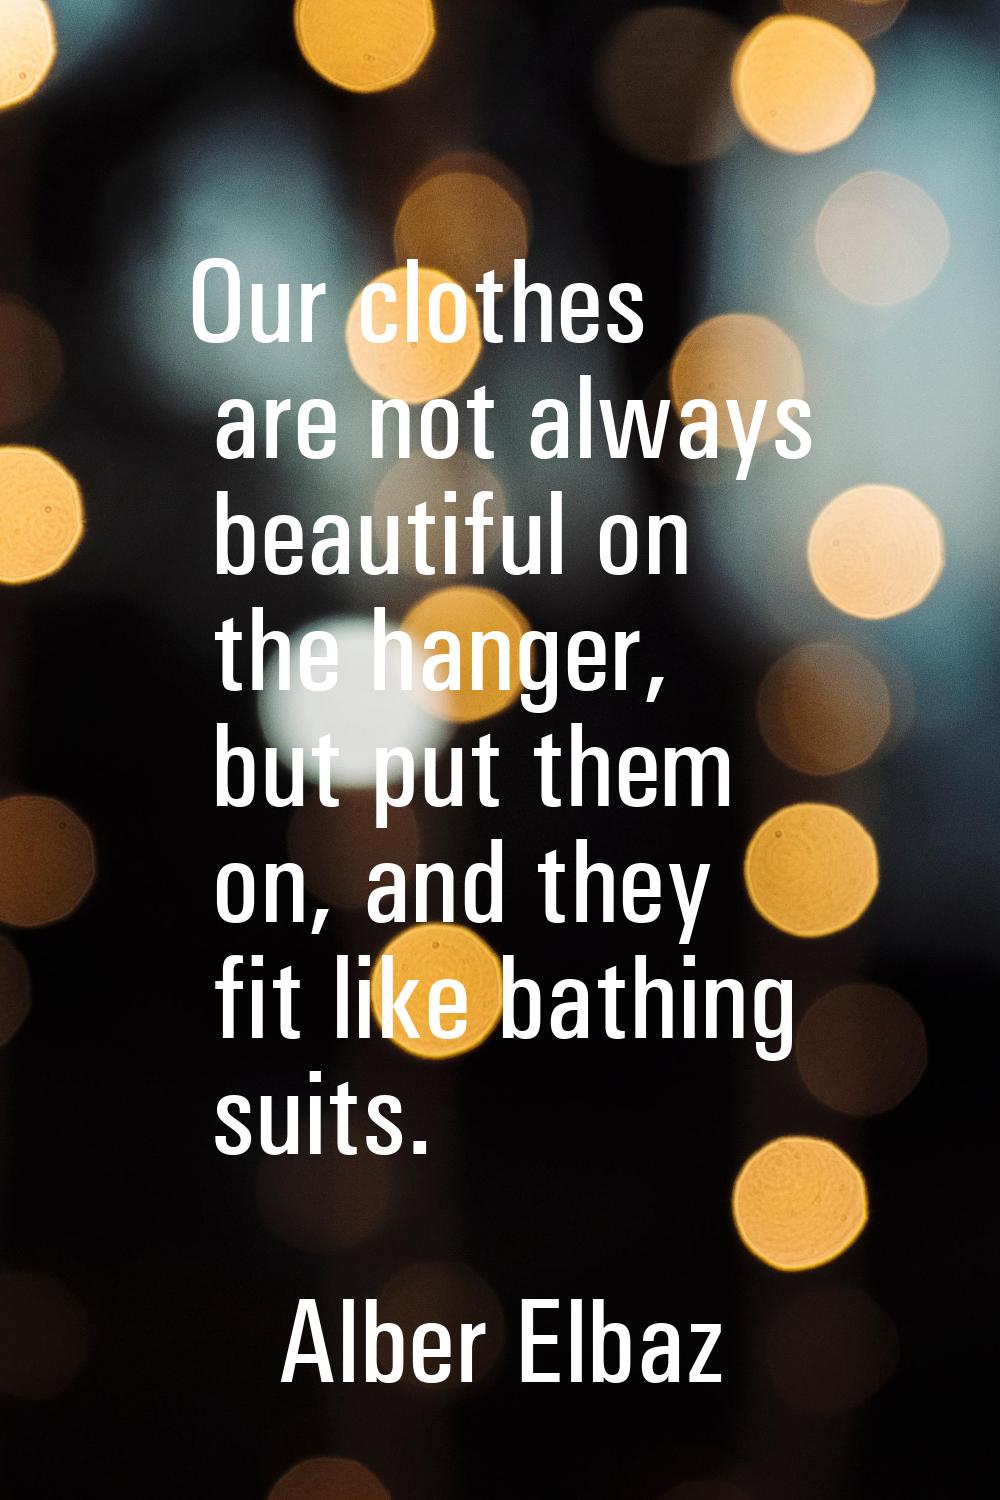 Our clothes are not always beautiful on the hanger, but put them on, and they fit like bathing suit